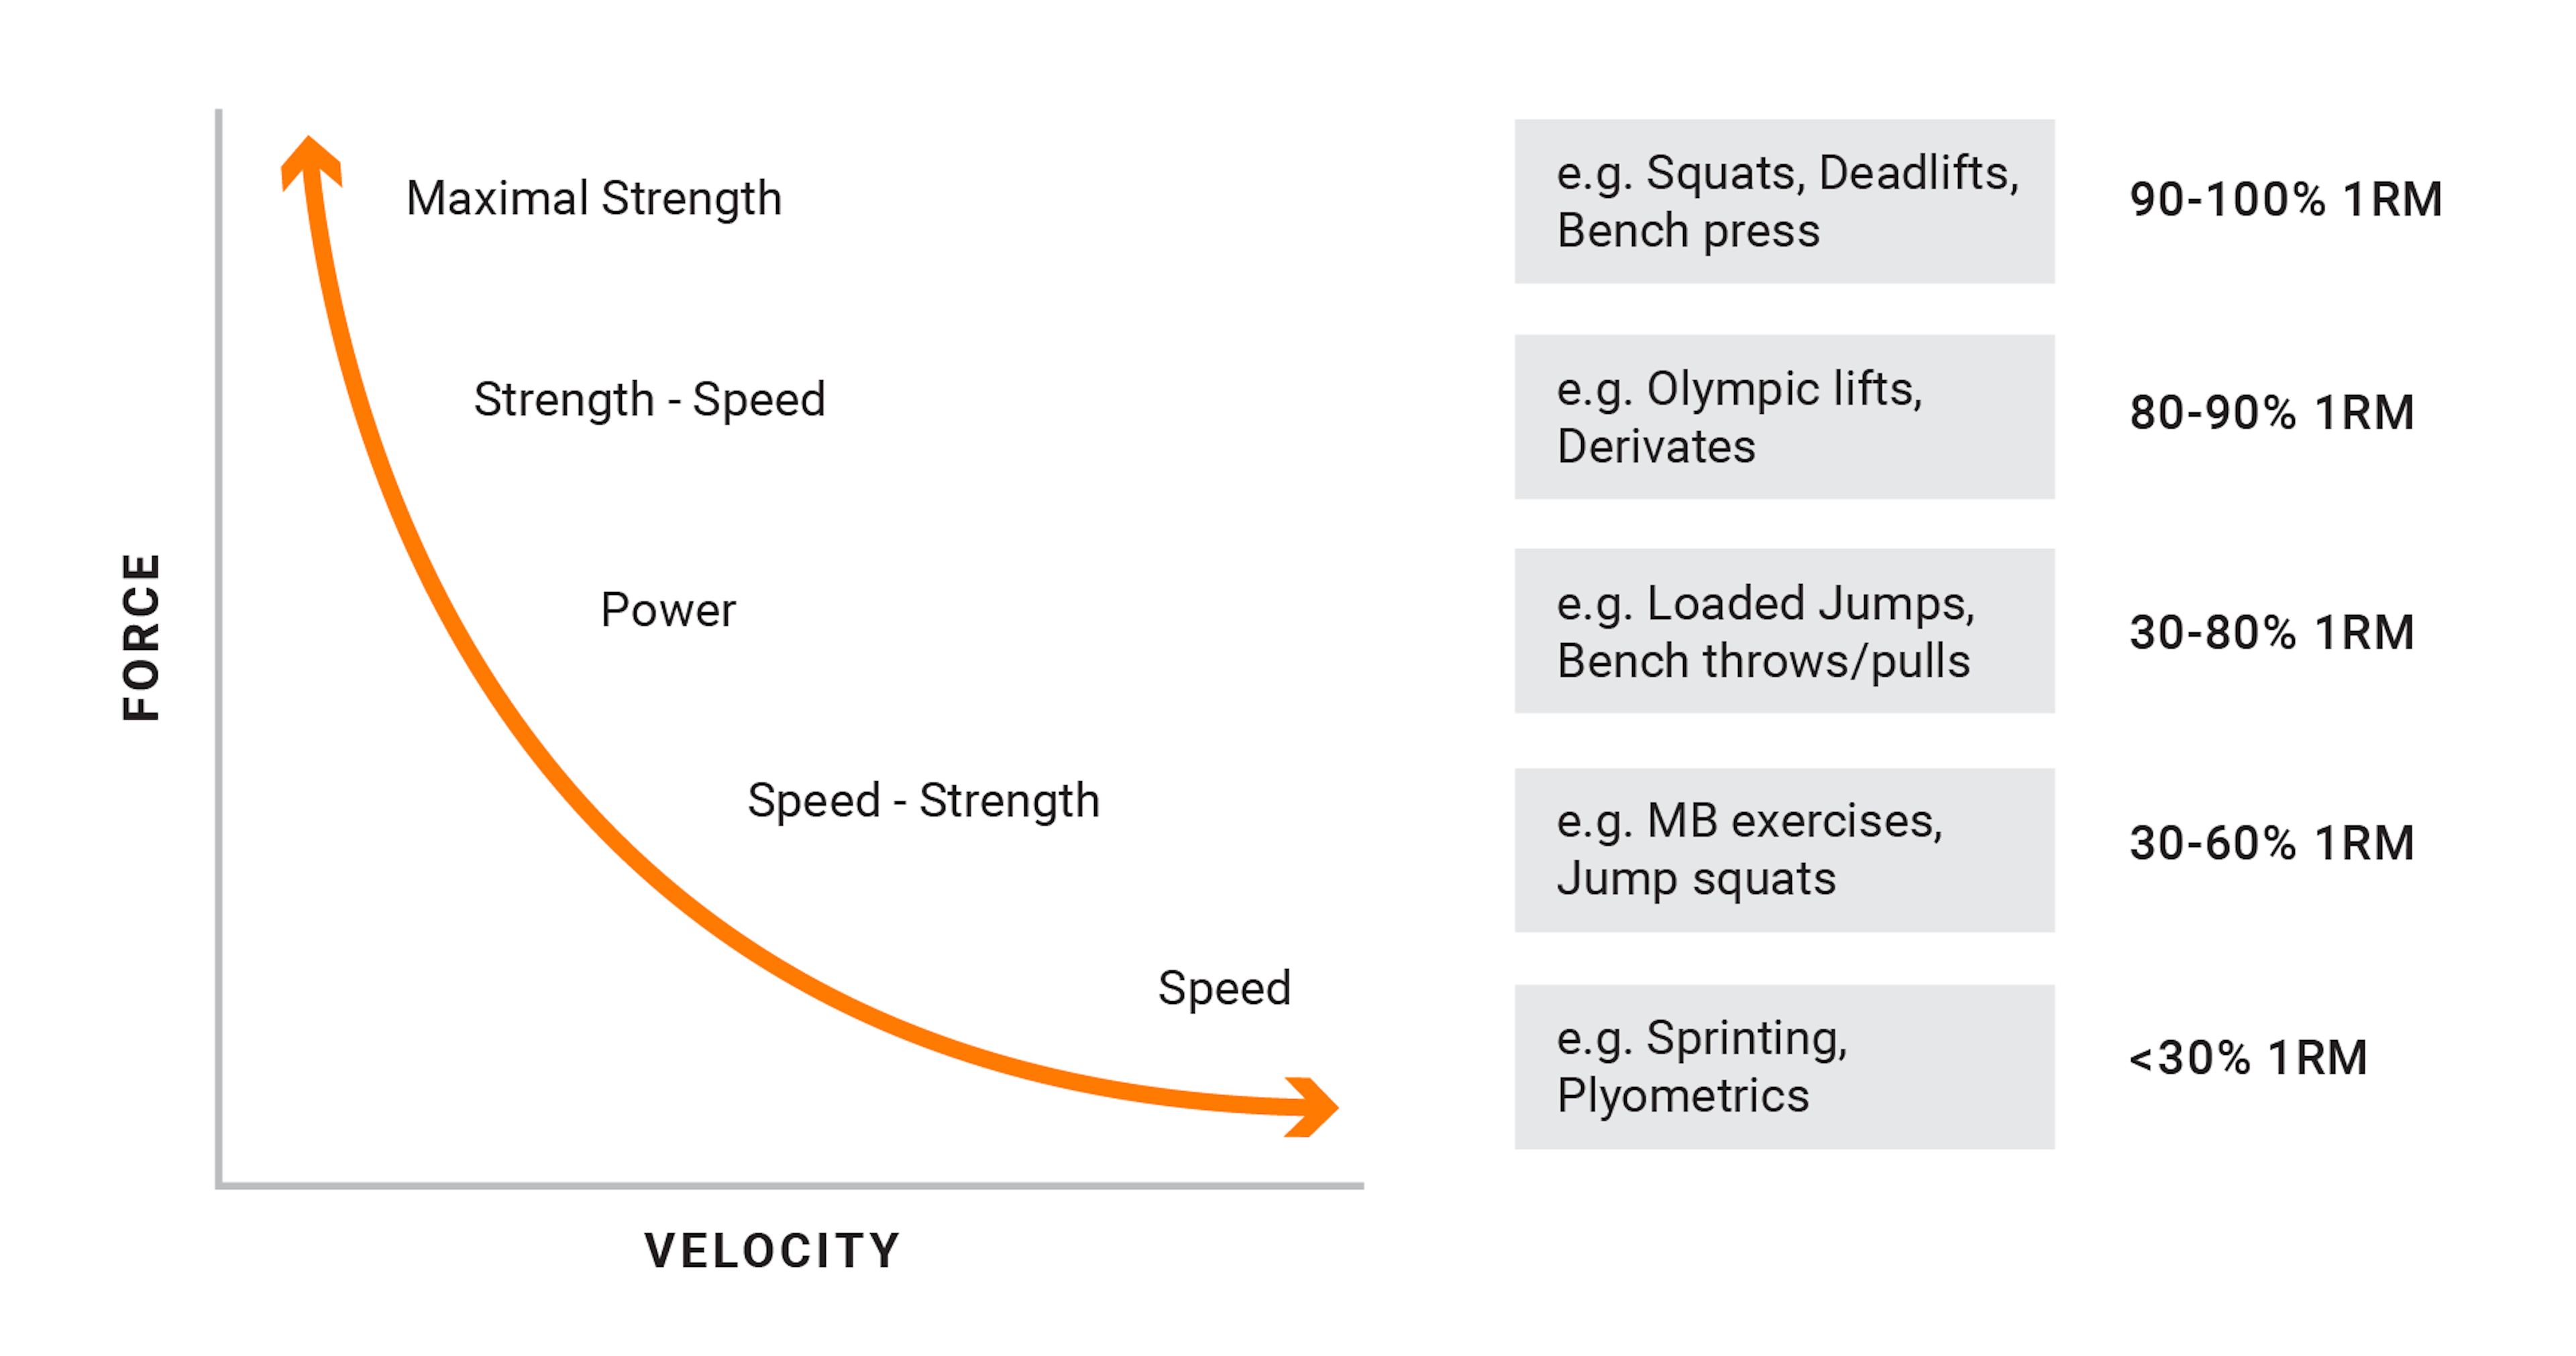 Figure 2. Force-velocity curve with some representative exercises to improve physical qualities.